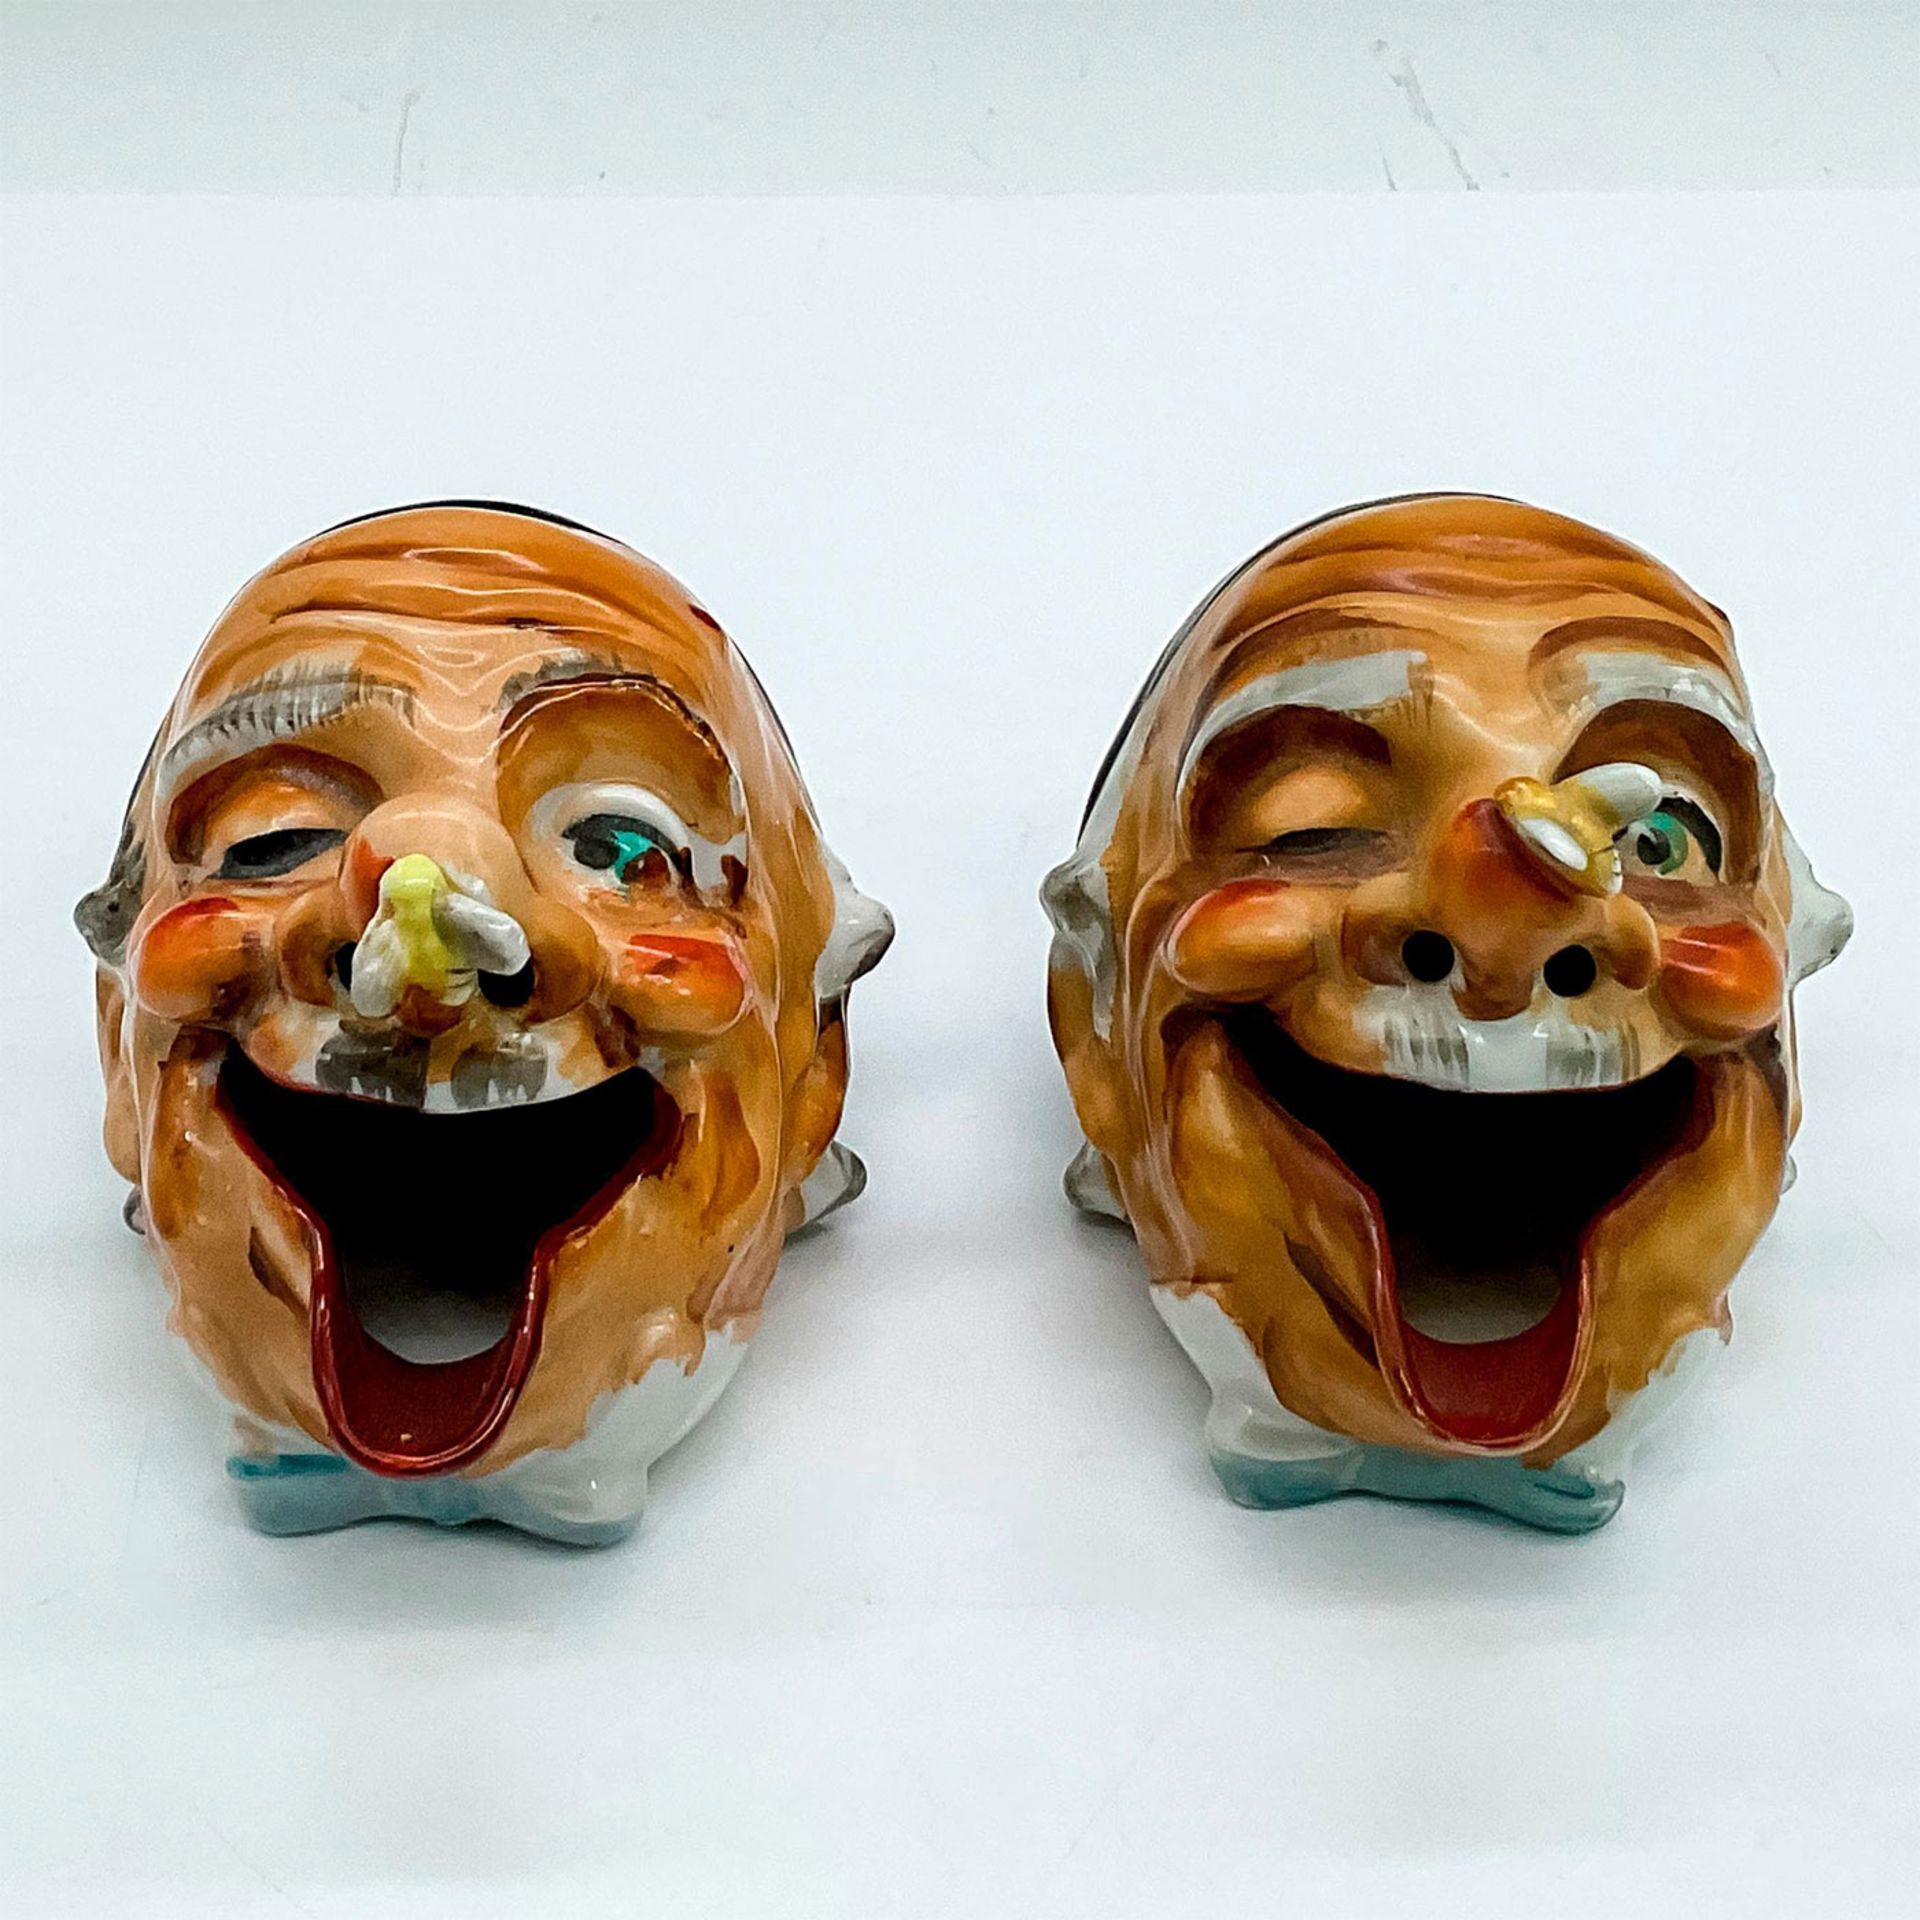 2pc Japanese Porcelain Ashtrays, Man With Bee on His Nose